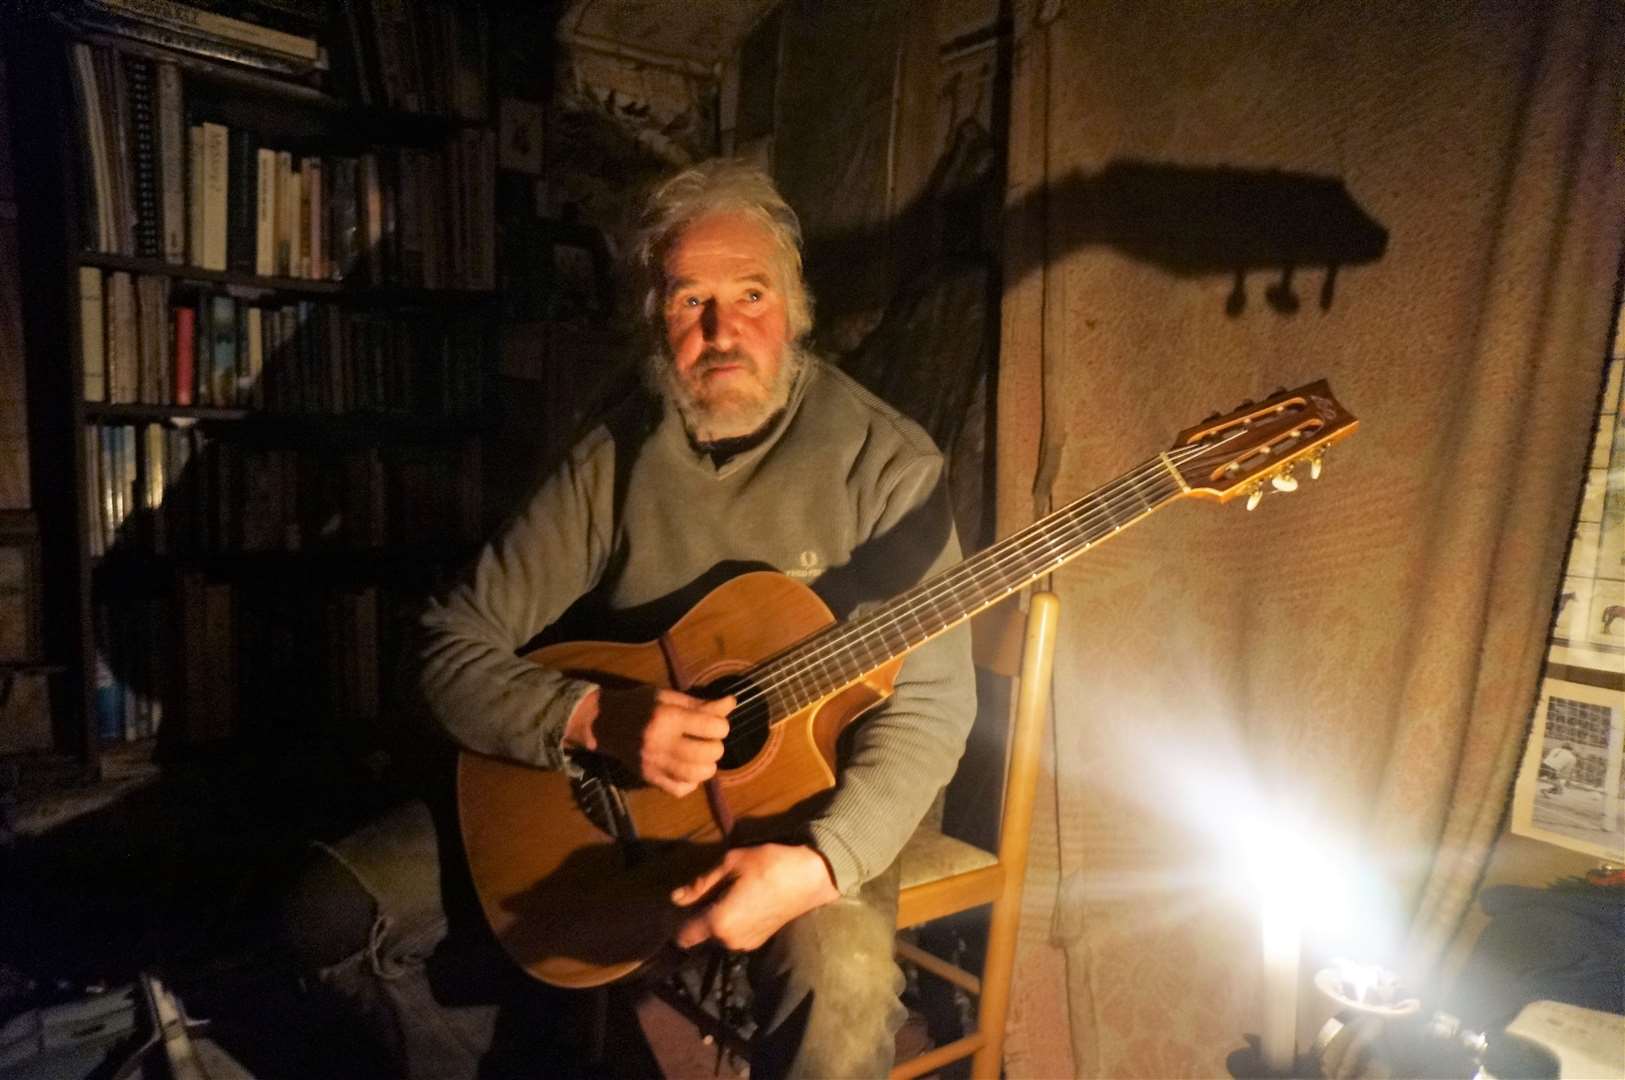 Marcus composes his own songs and describes himself as a very spiritual man. He regularly busks in Dornoch, Wick and Thurso. Picture: DGS